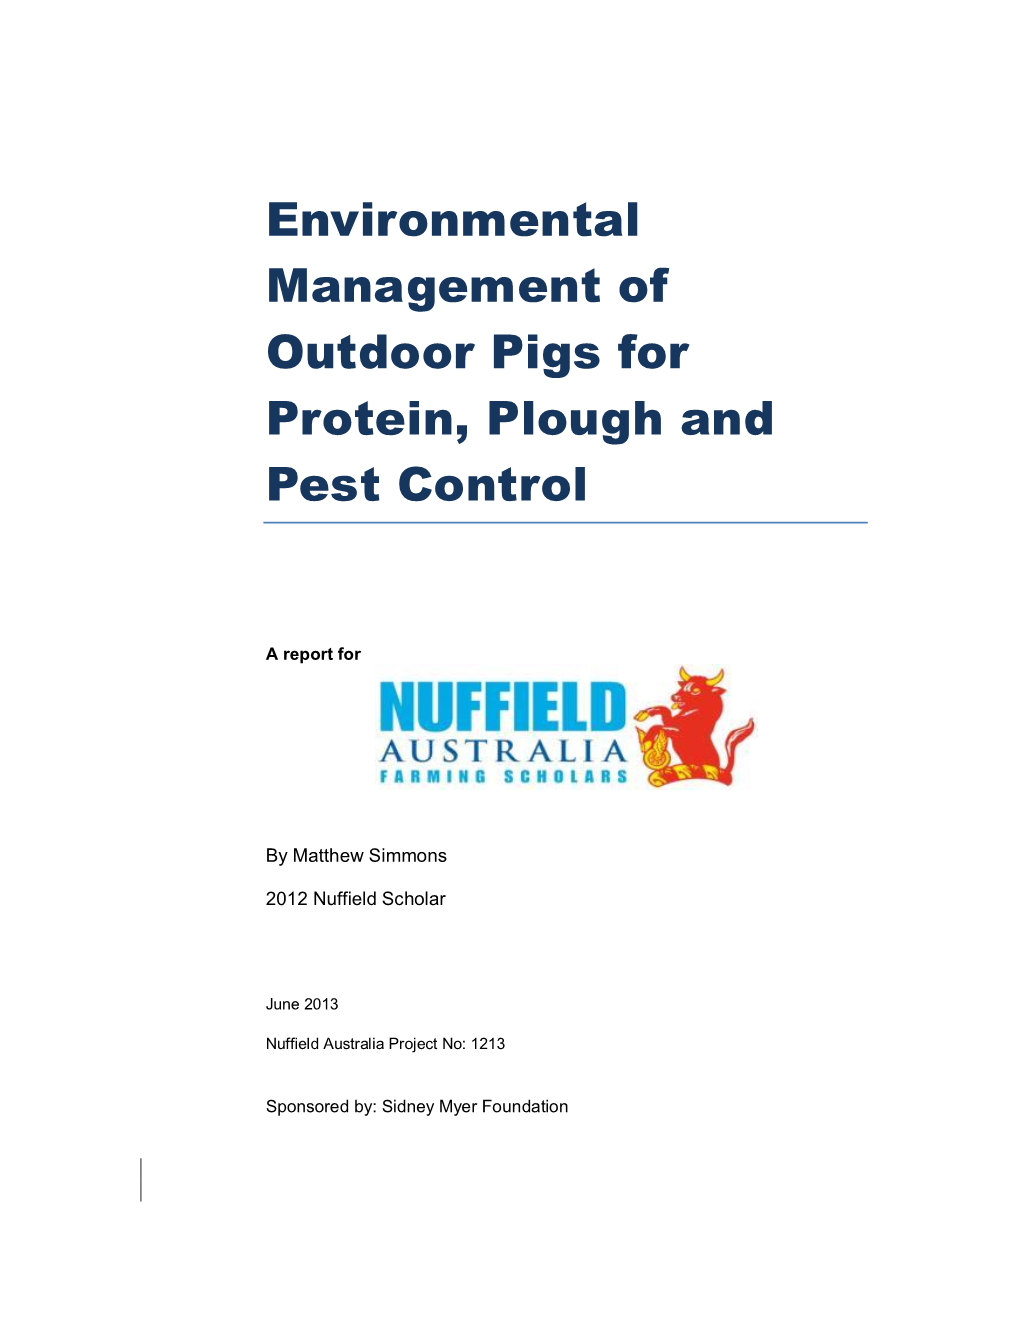 Environmental Management of Outdoor Pigs for Protein, Plough and Pest Control